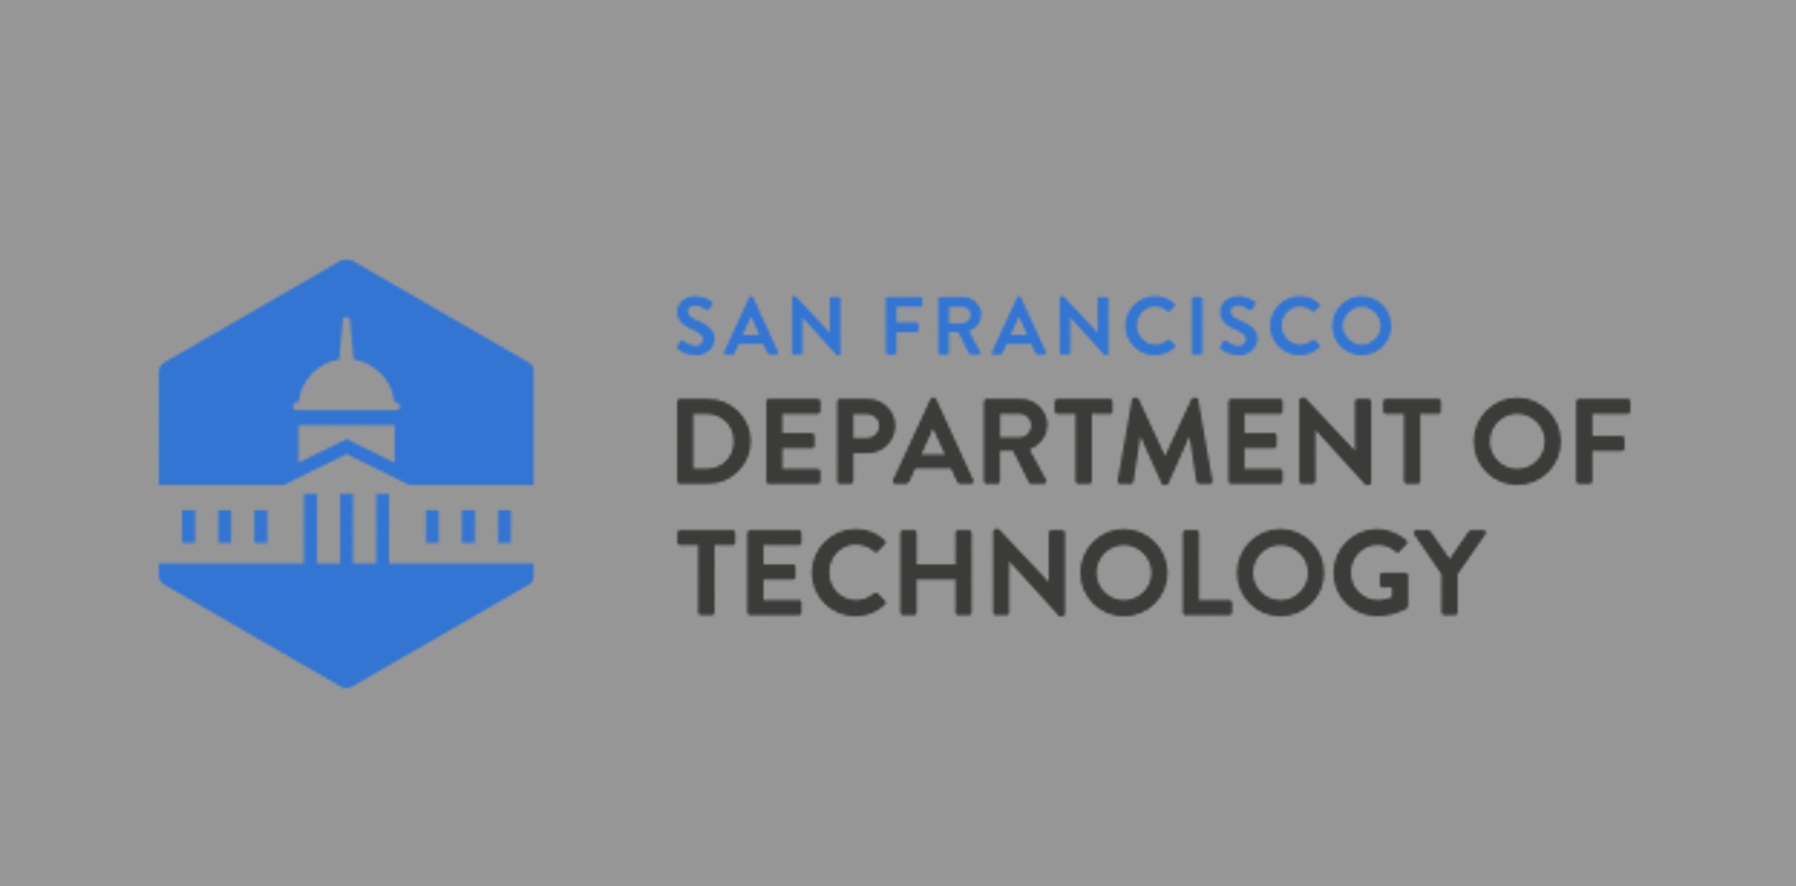 SAN FRANCISCO DEPARTMENT OF TECHNOLOGY